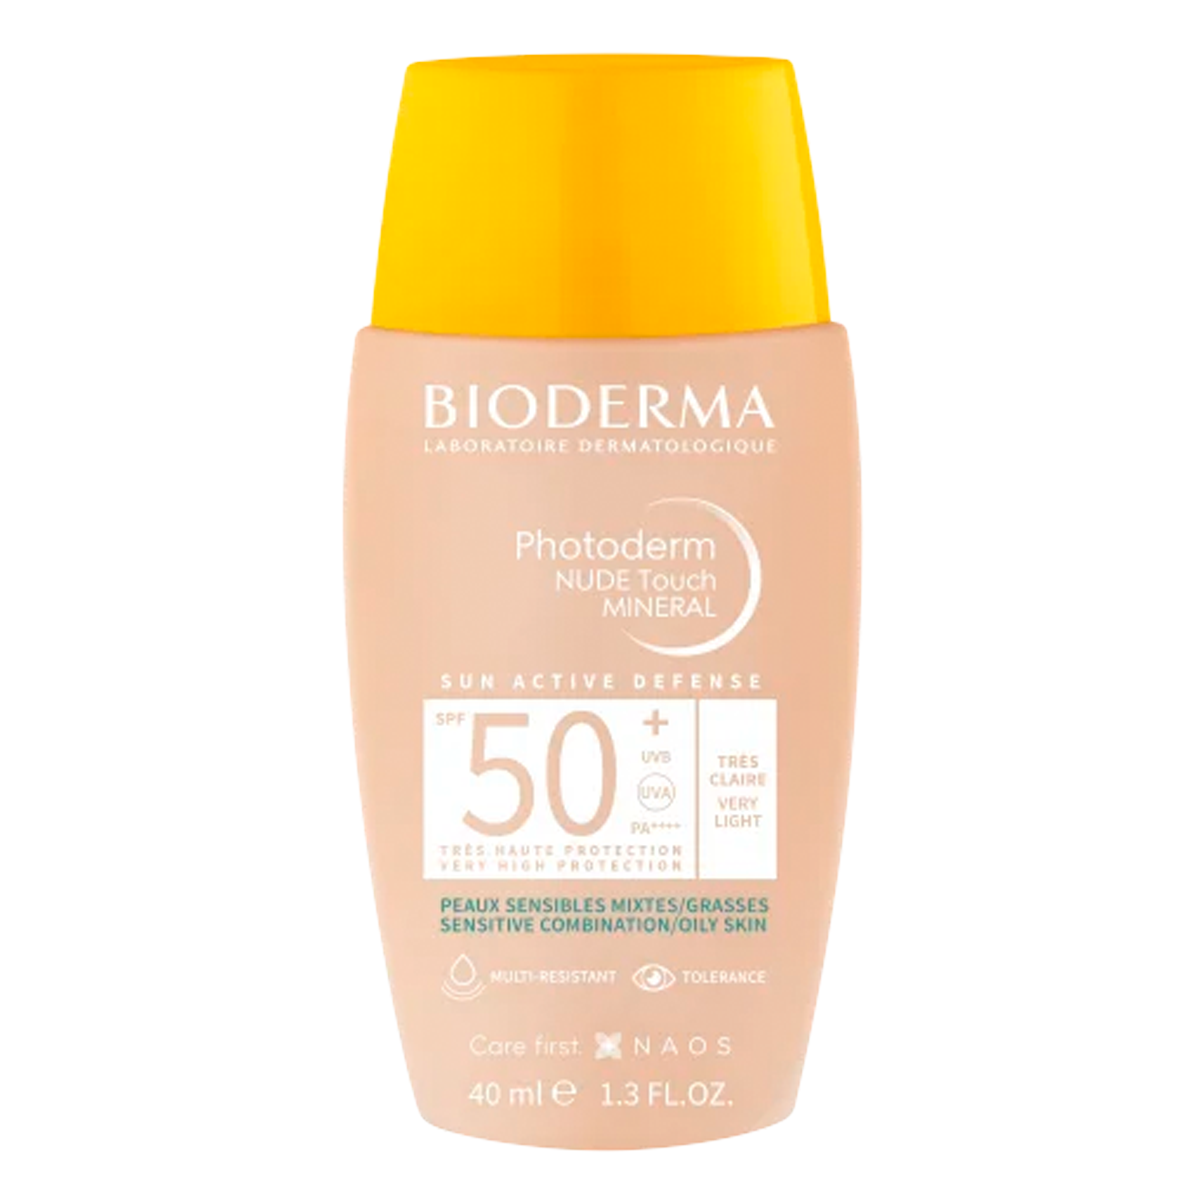 Photoderm NUDE Touch SPF 50+ Very Light Colour